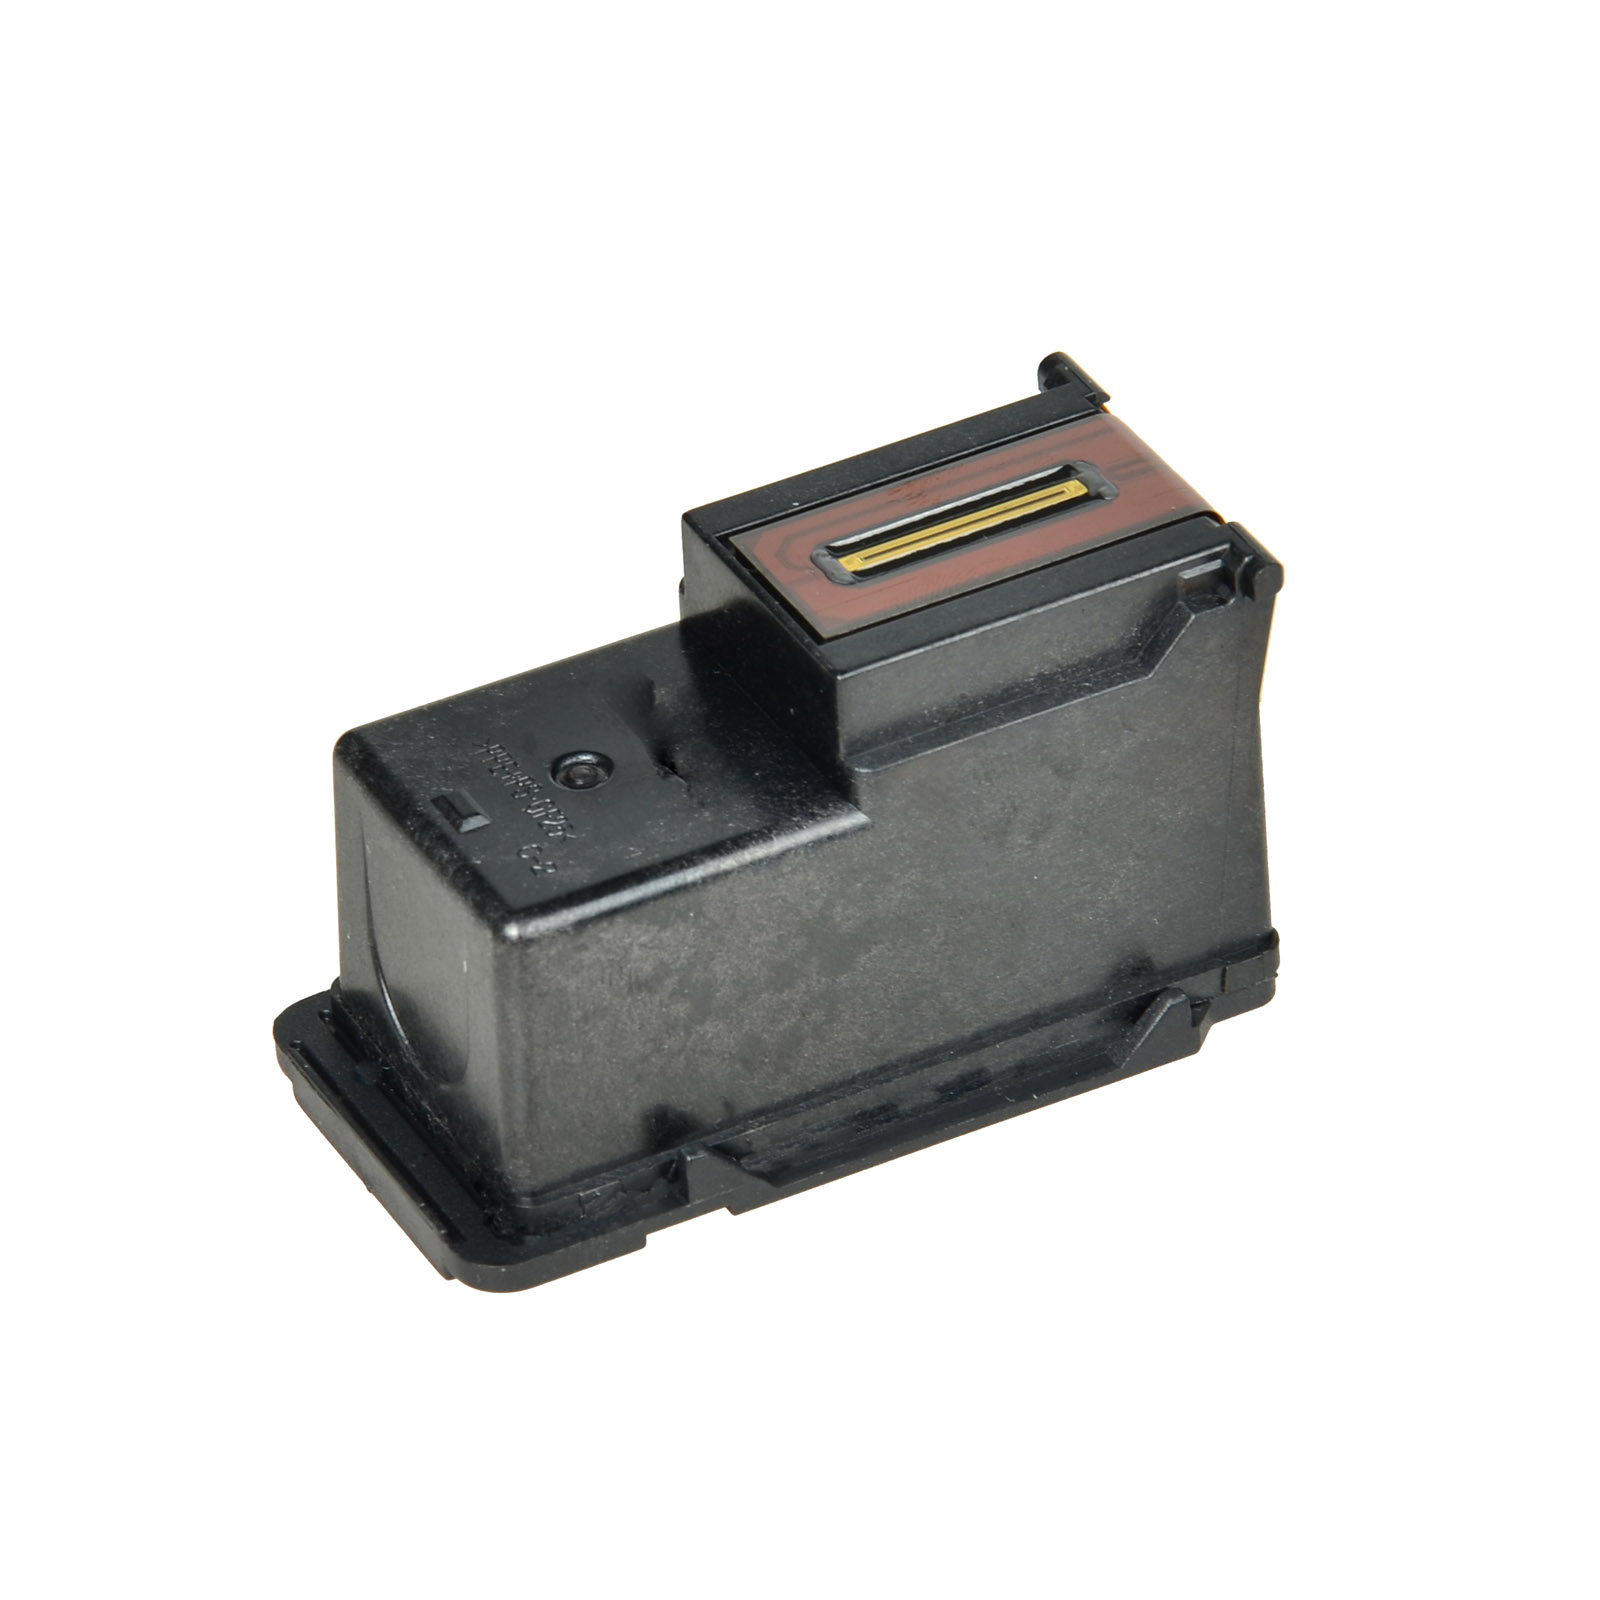 canon mx870 ink replacement instructions